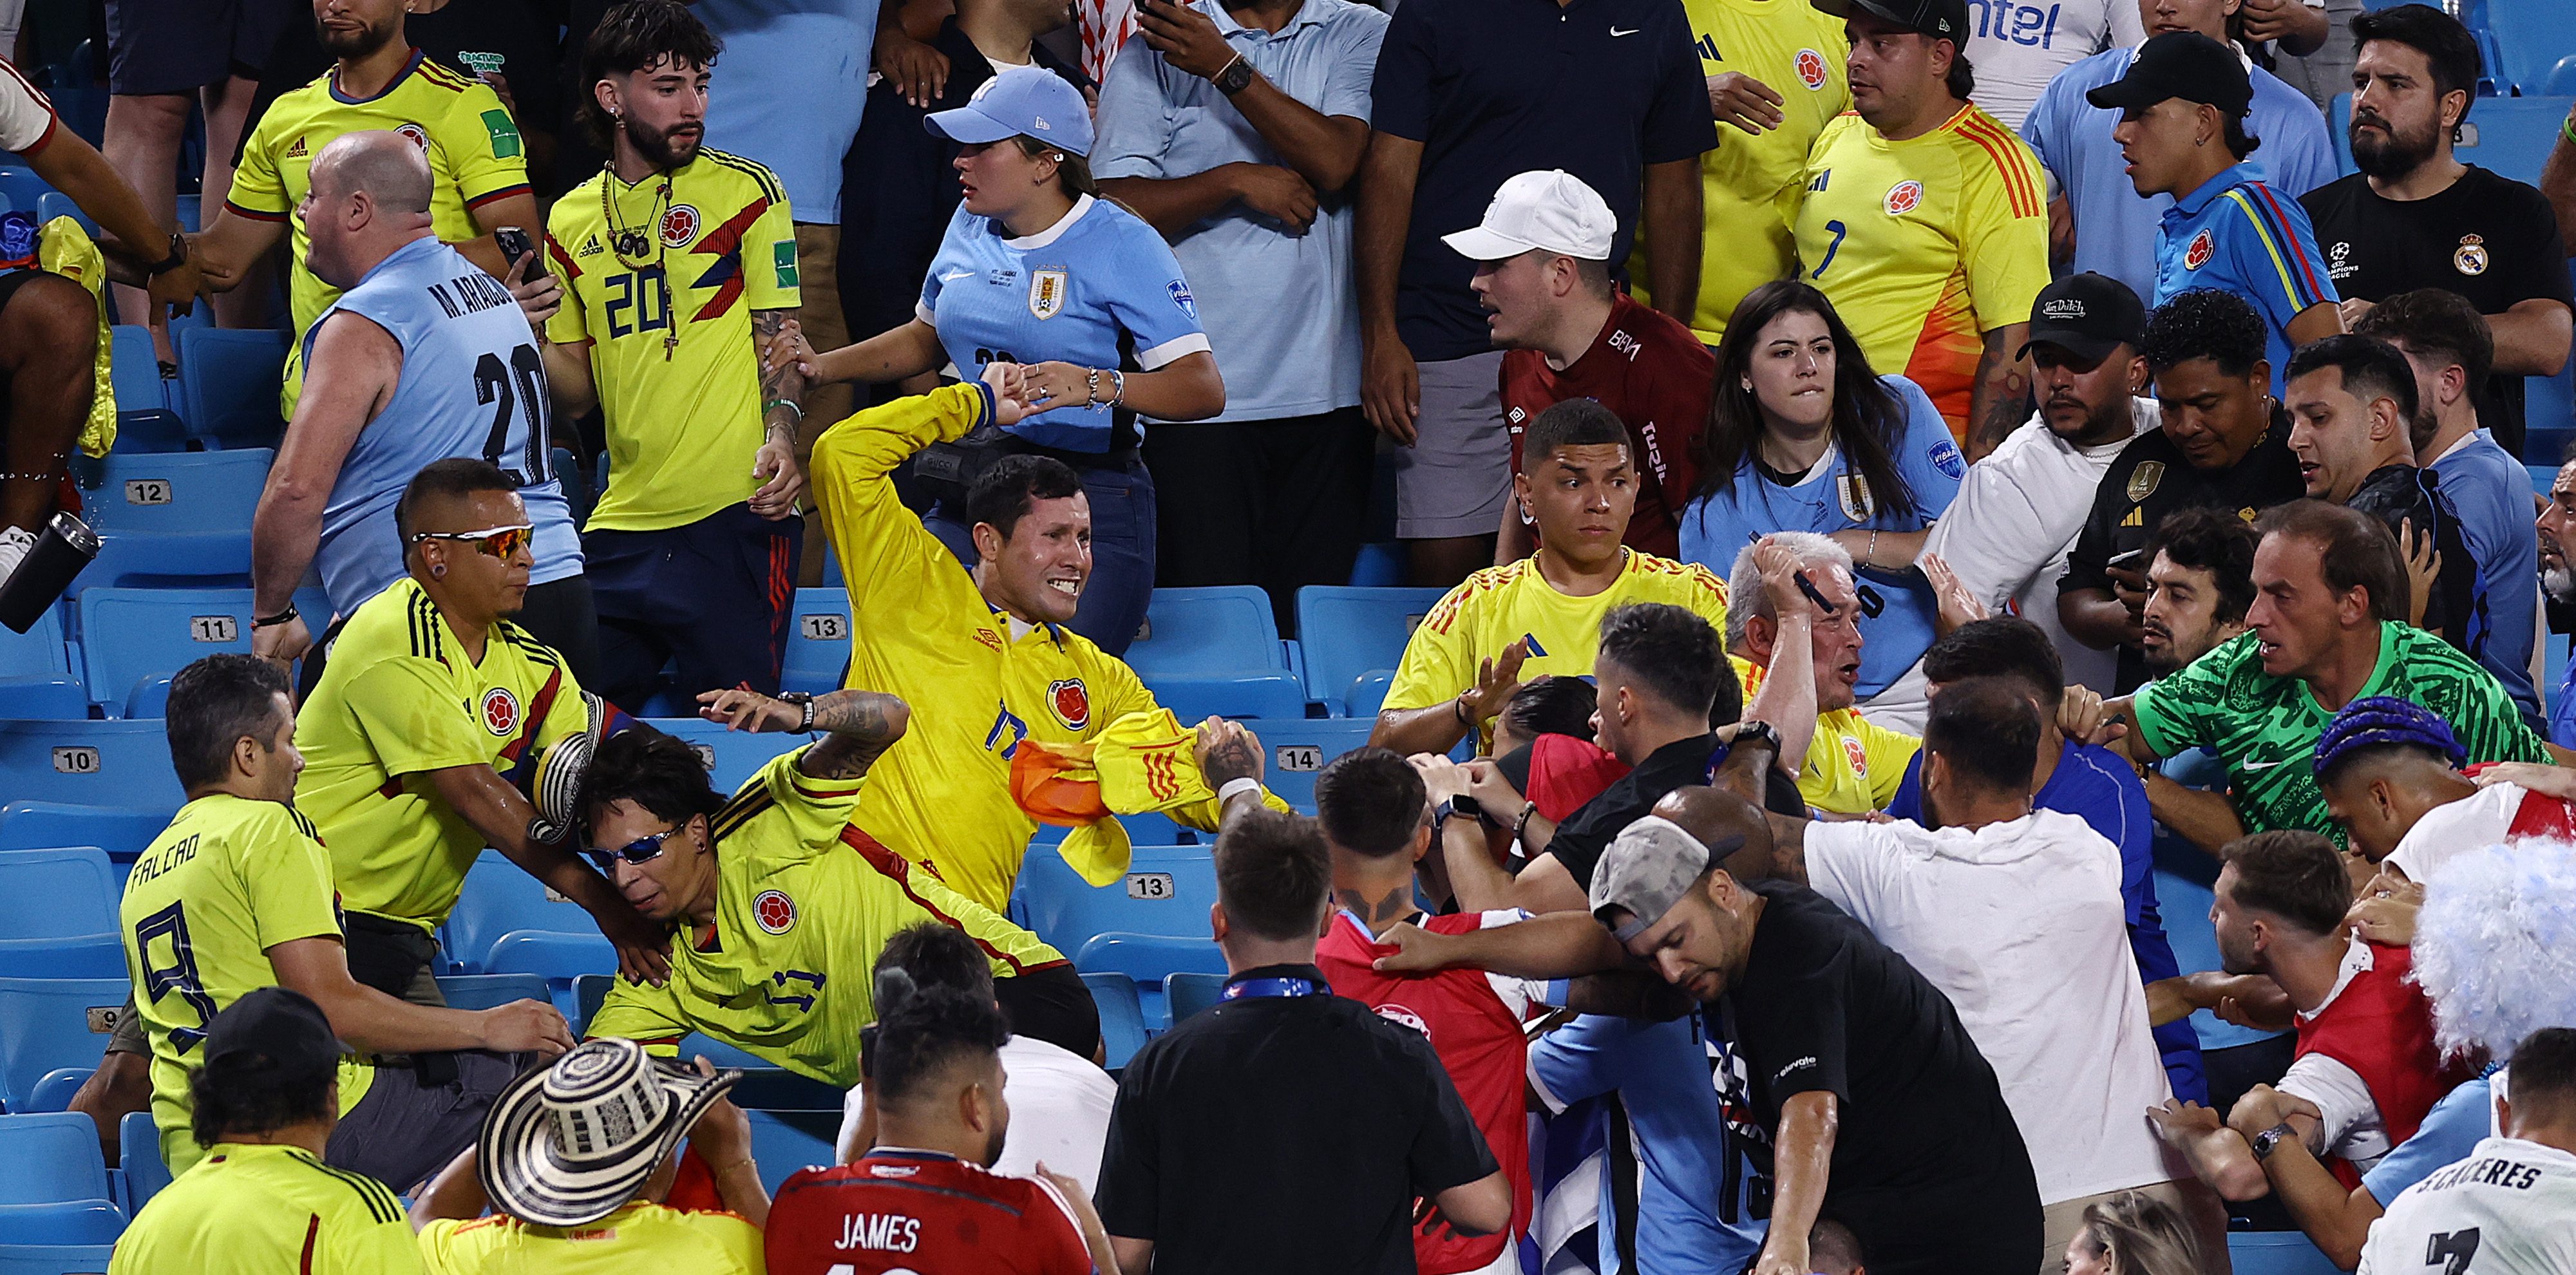 Uruguay players appear to scuffle in stands with Colombian fans after Copa America game